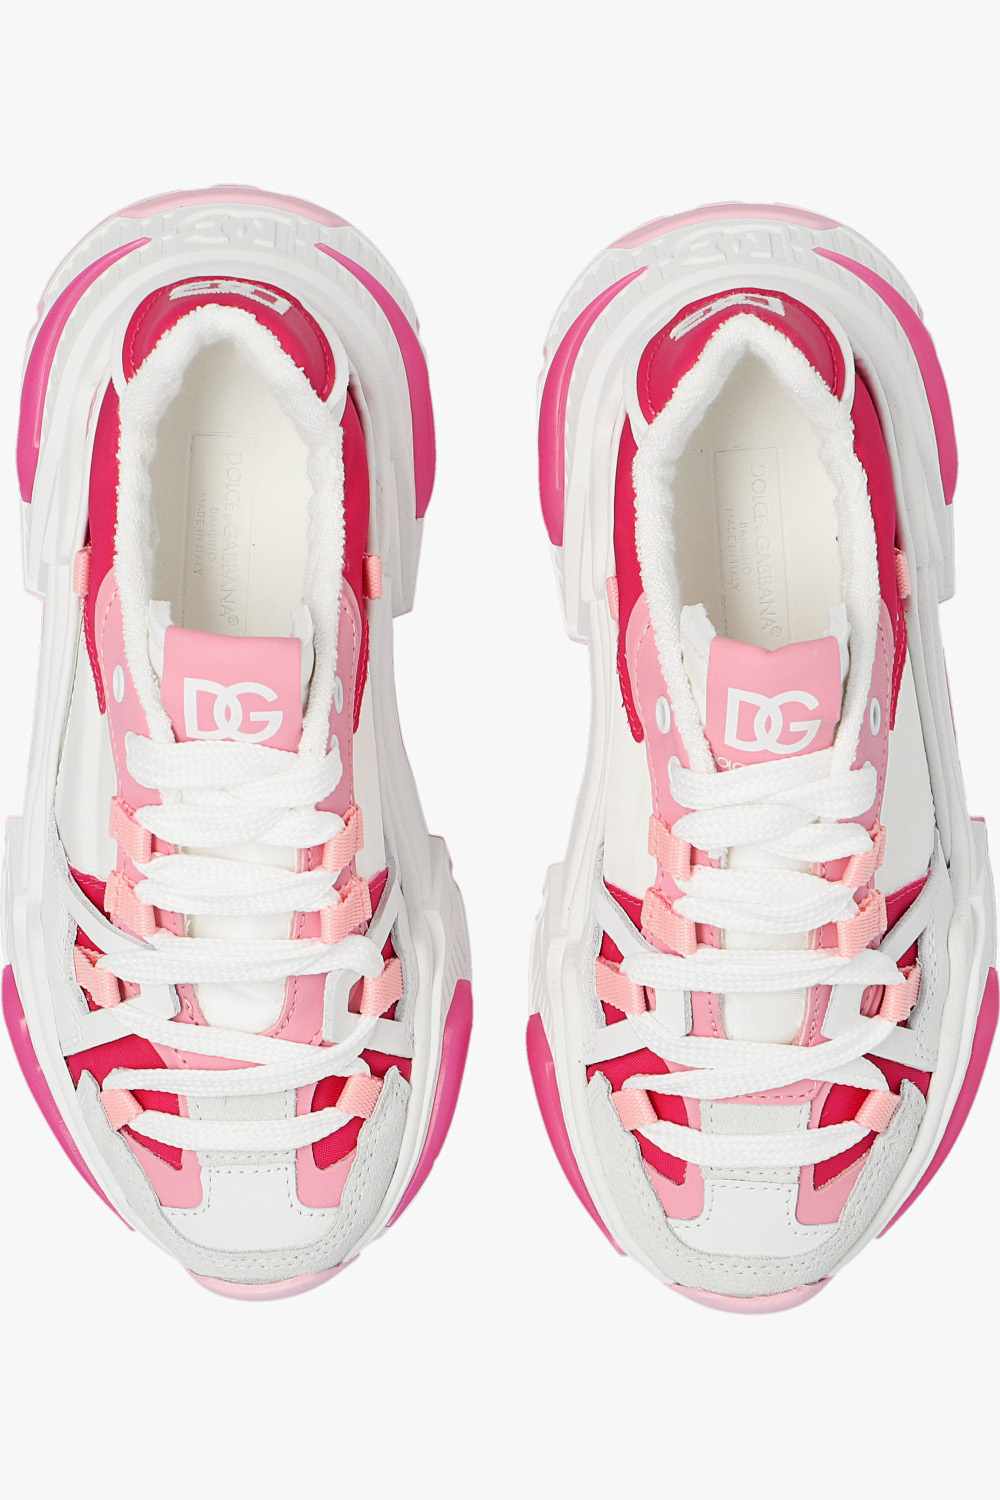 dolce swimming & Gabbana Kids Leather sneakers